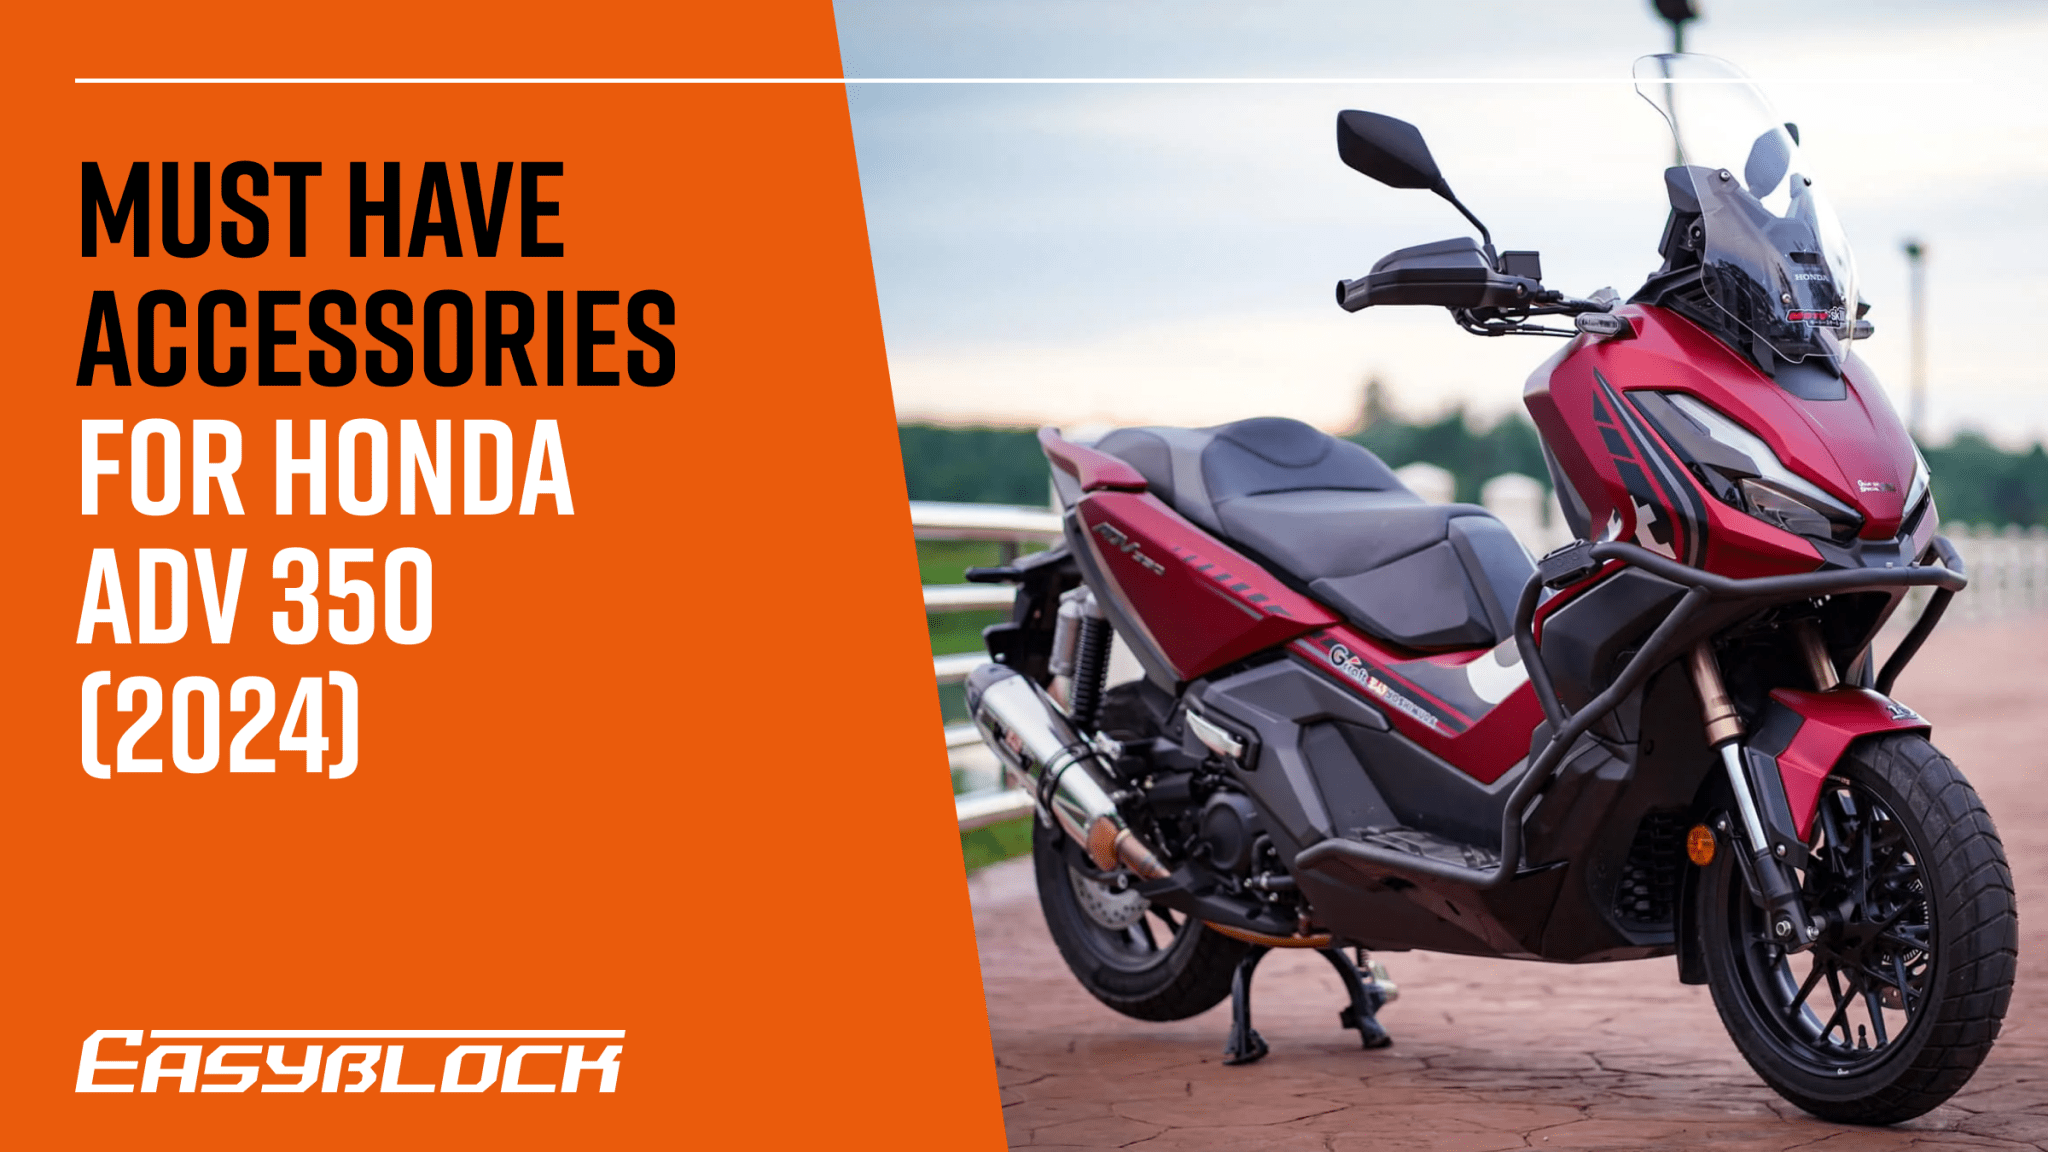 Must Have Accessories for Honda ADV 350 (2024 Edition)